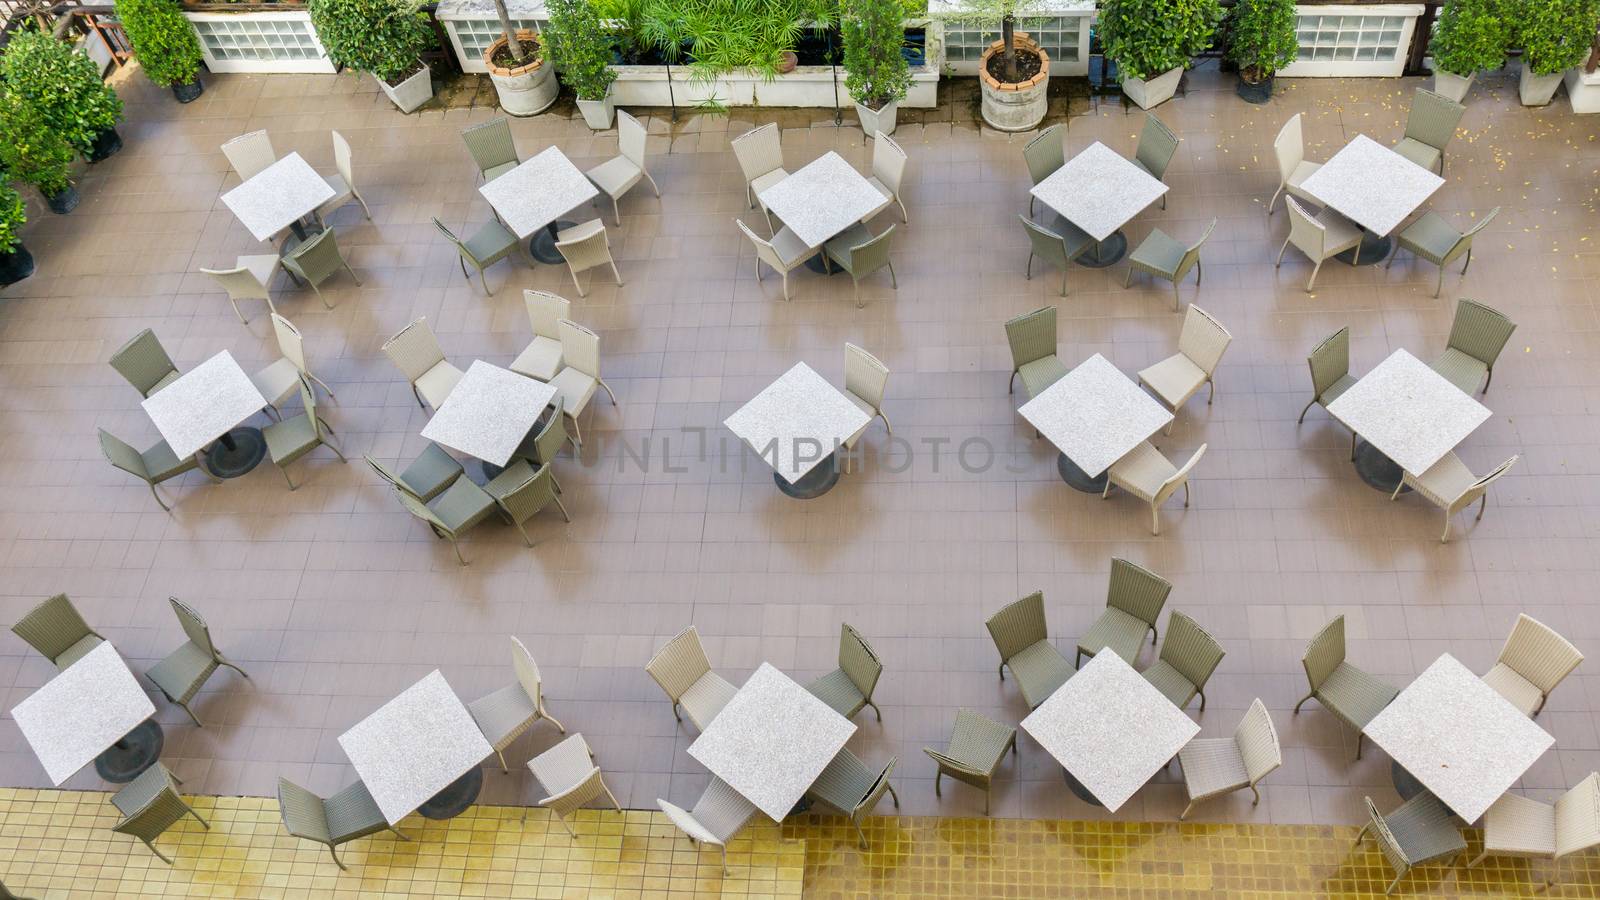 Outdoor top view of the empty chairs and table by nopparats